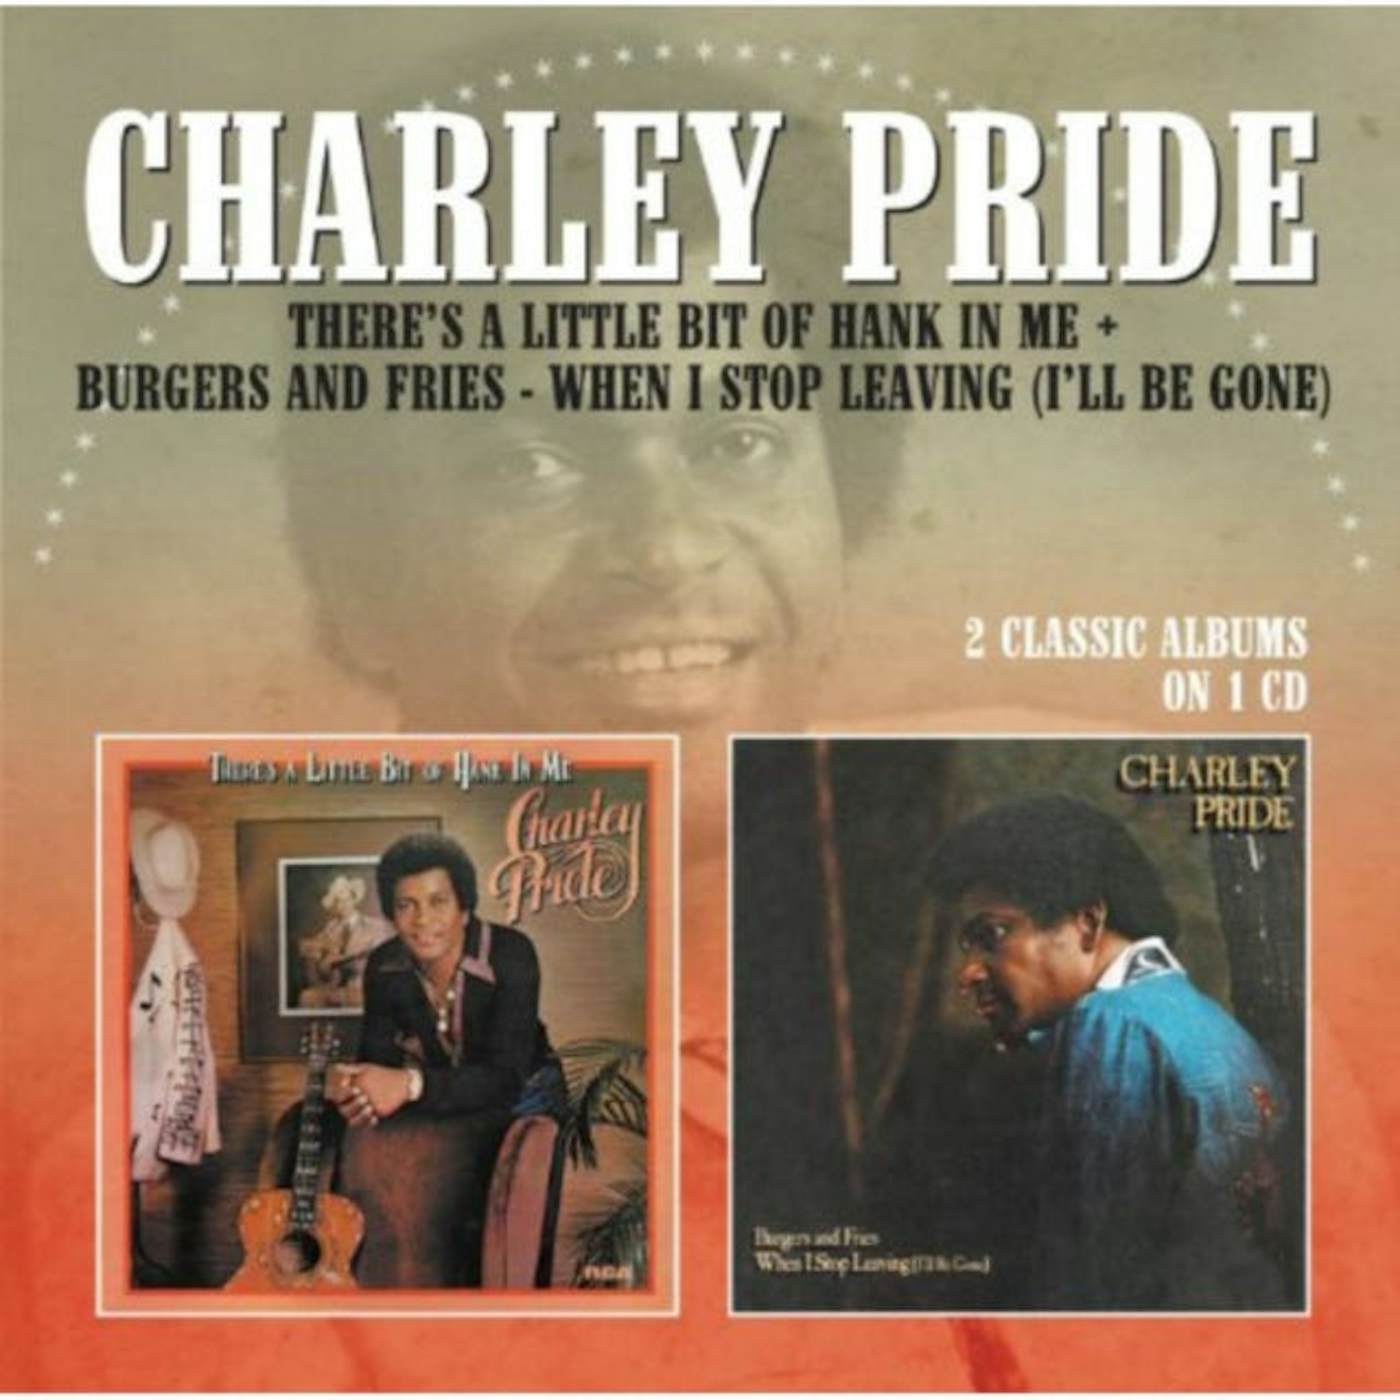 Charley Pride CD - There's A Little Bit Of Hank In Me / Burgers And Fries